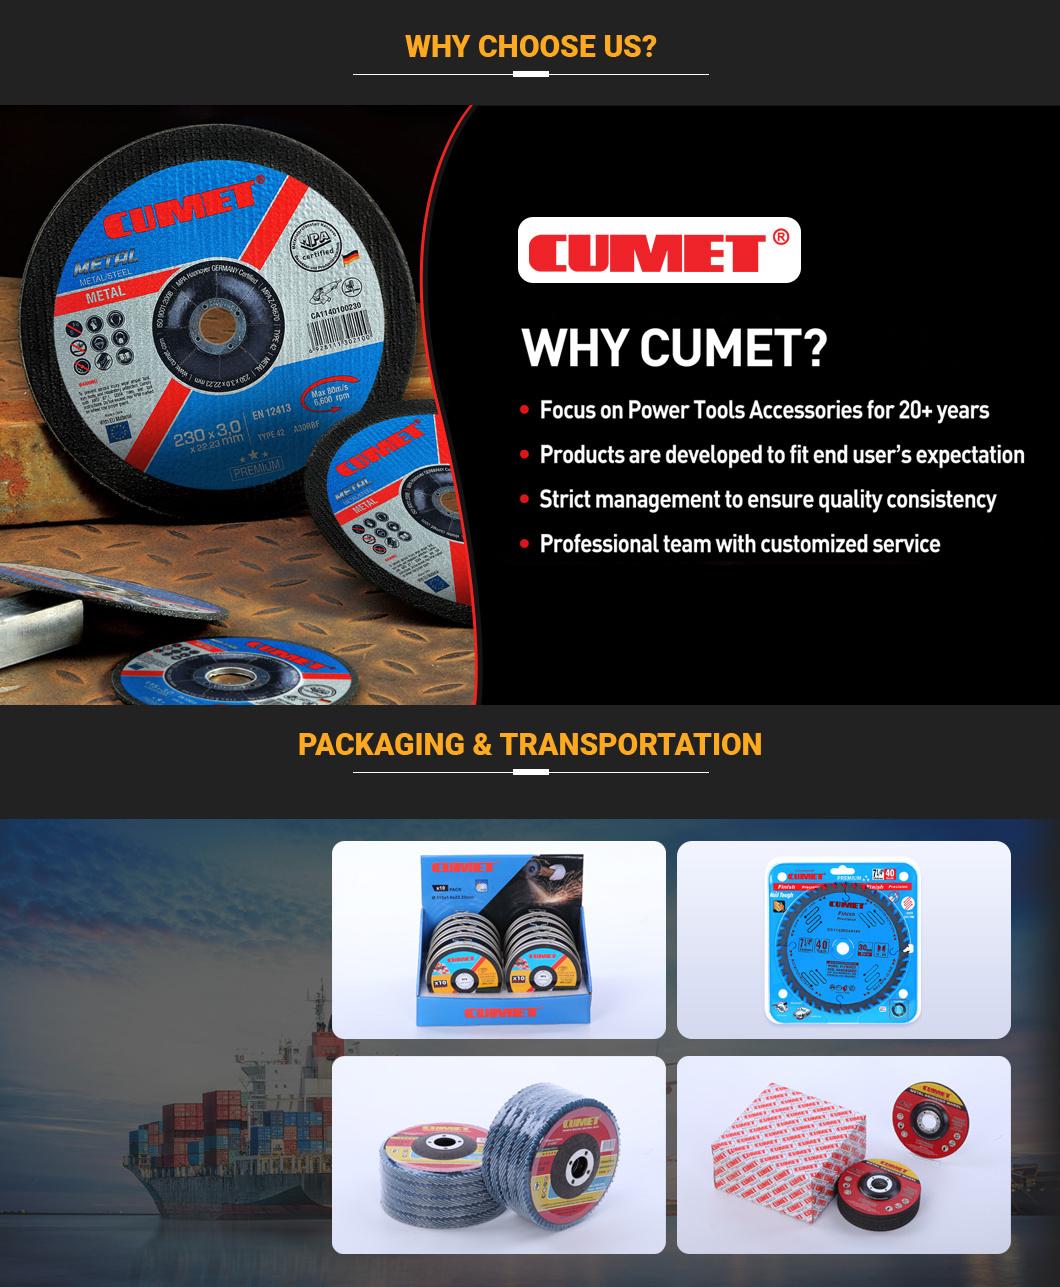 Cumet 4.5” 115mm Super Thin Cutting Wheel for Metal and Inox